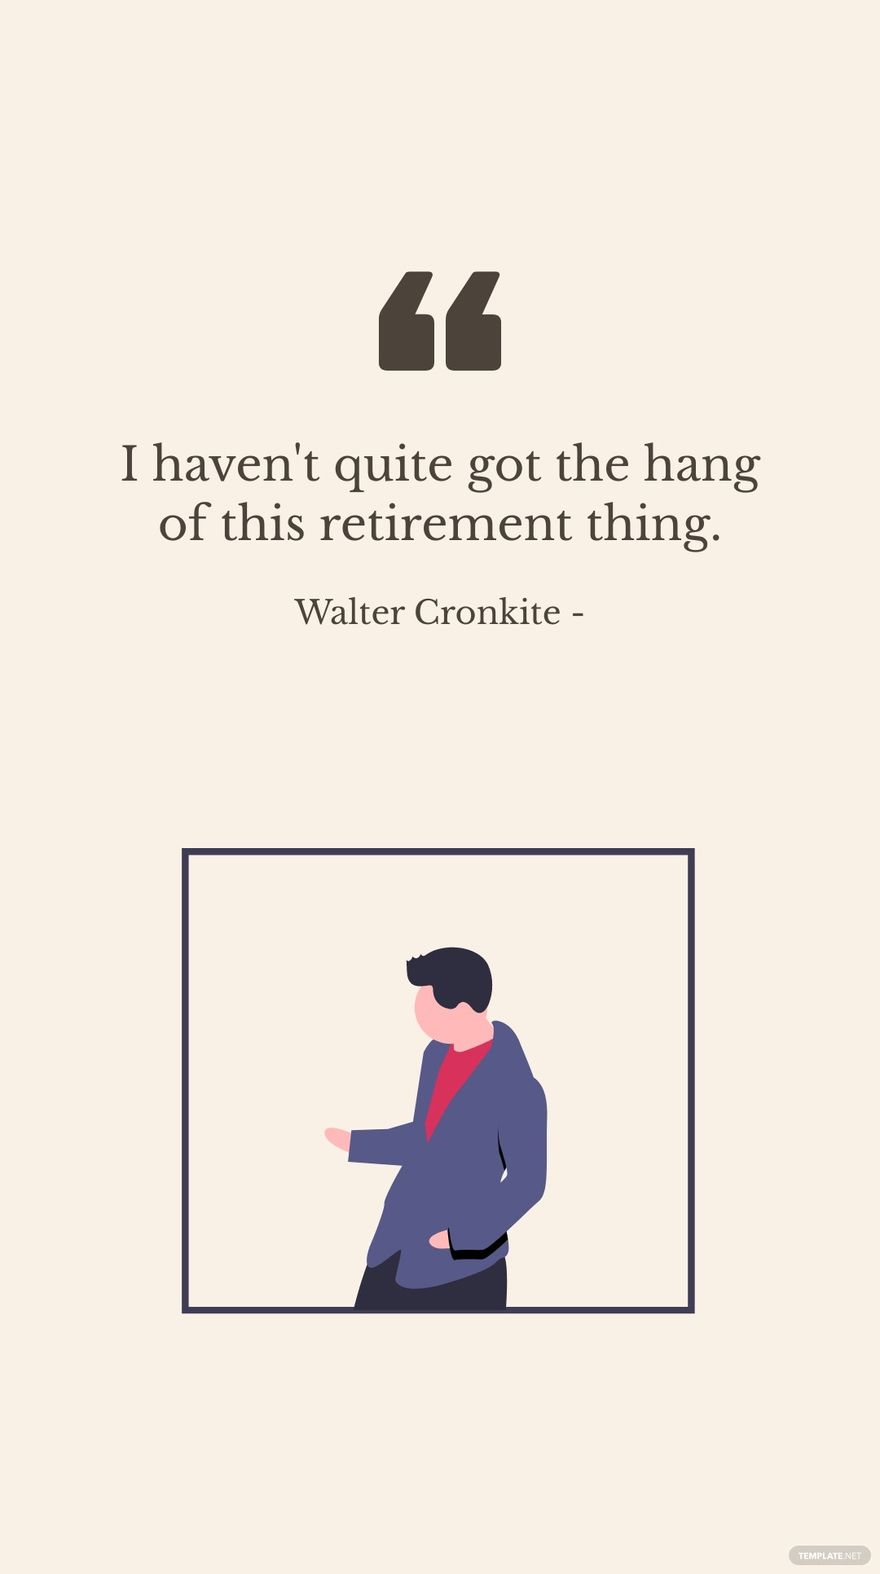 Walter Cronkite - I haven't quite got the hang of this retirement thing.